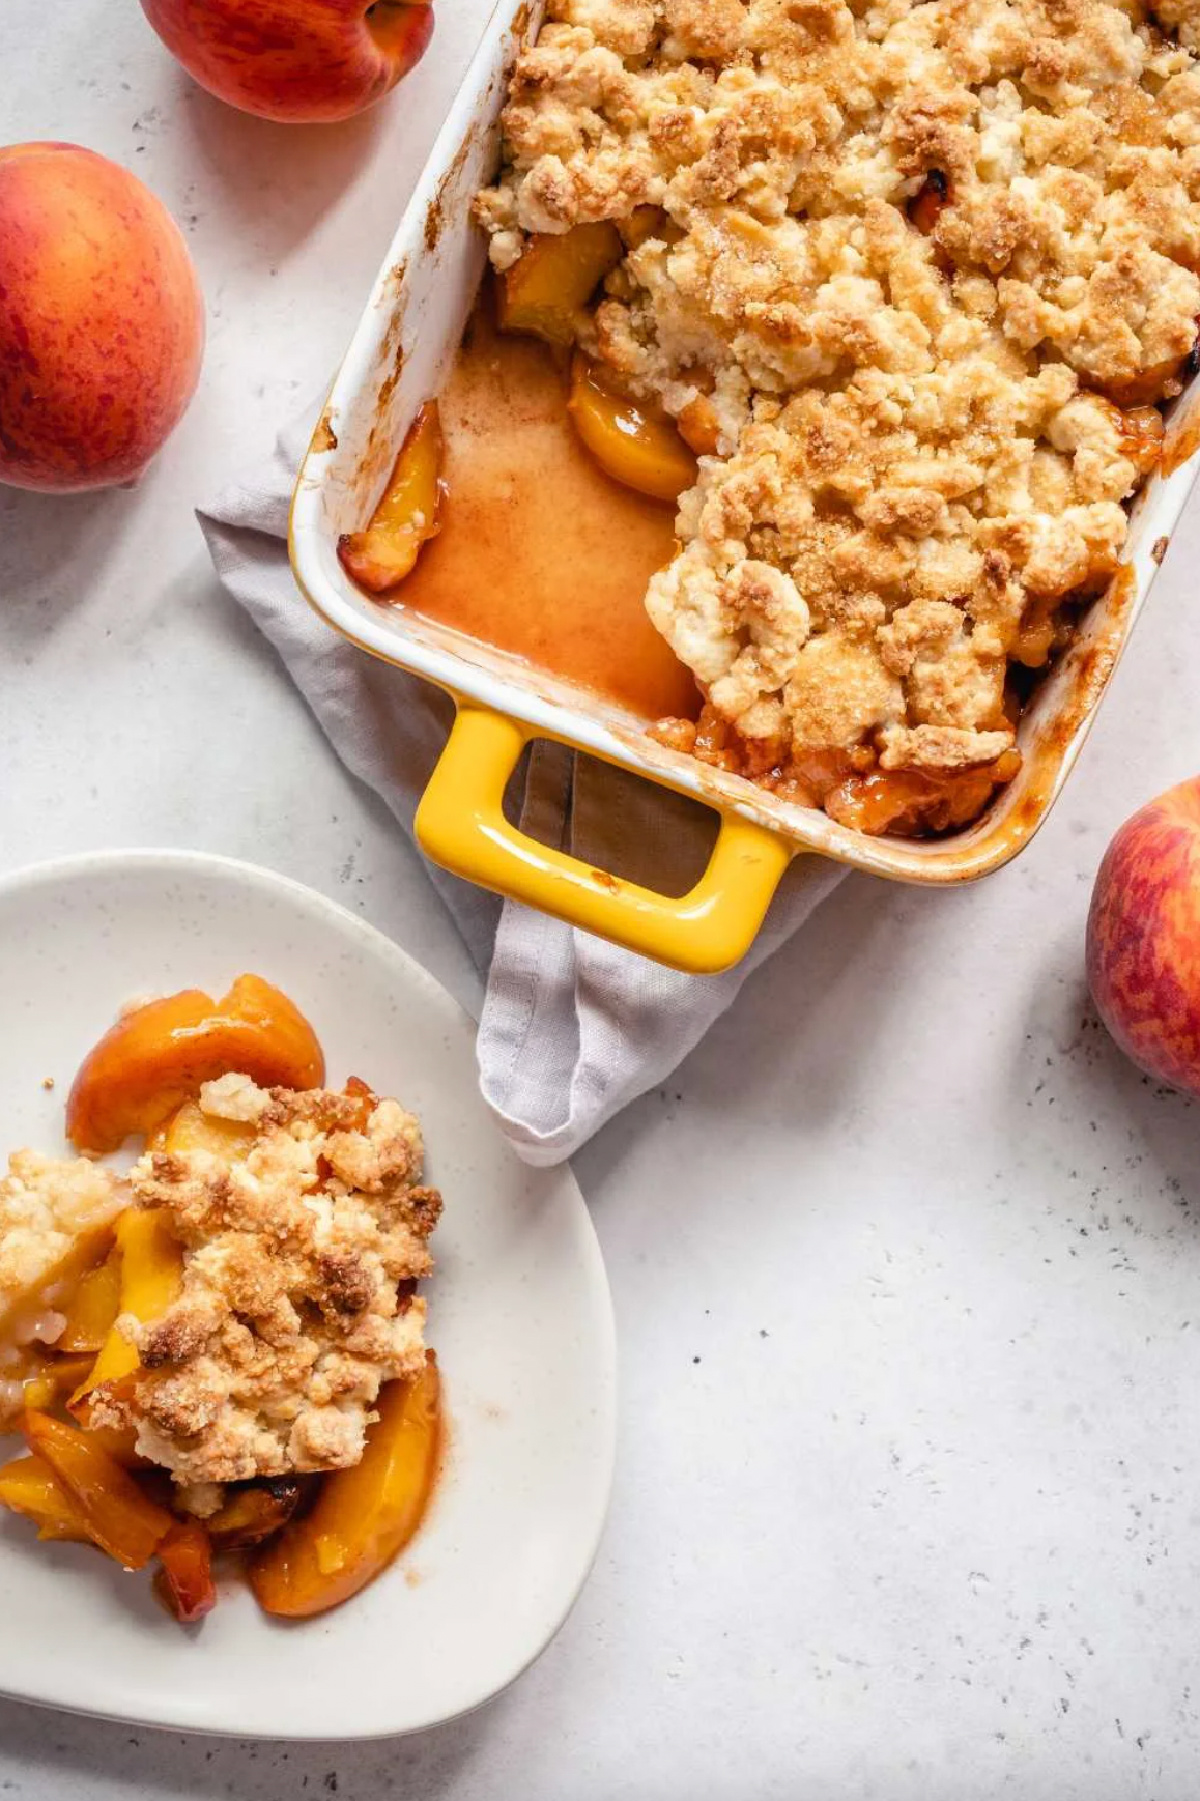 ina garten's peach cobbler in baking dish and serving on plate